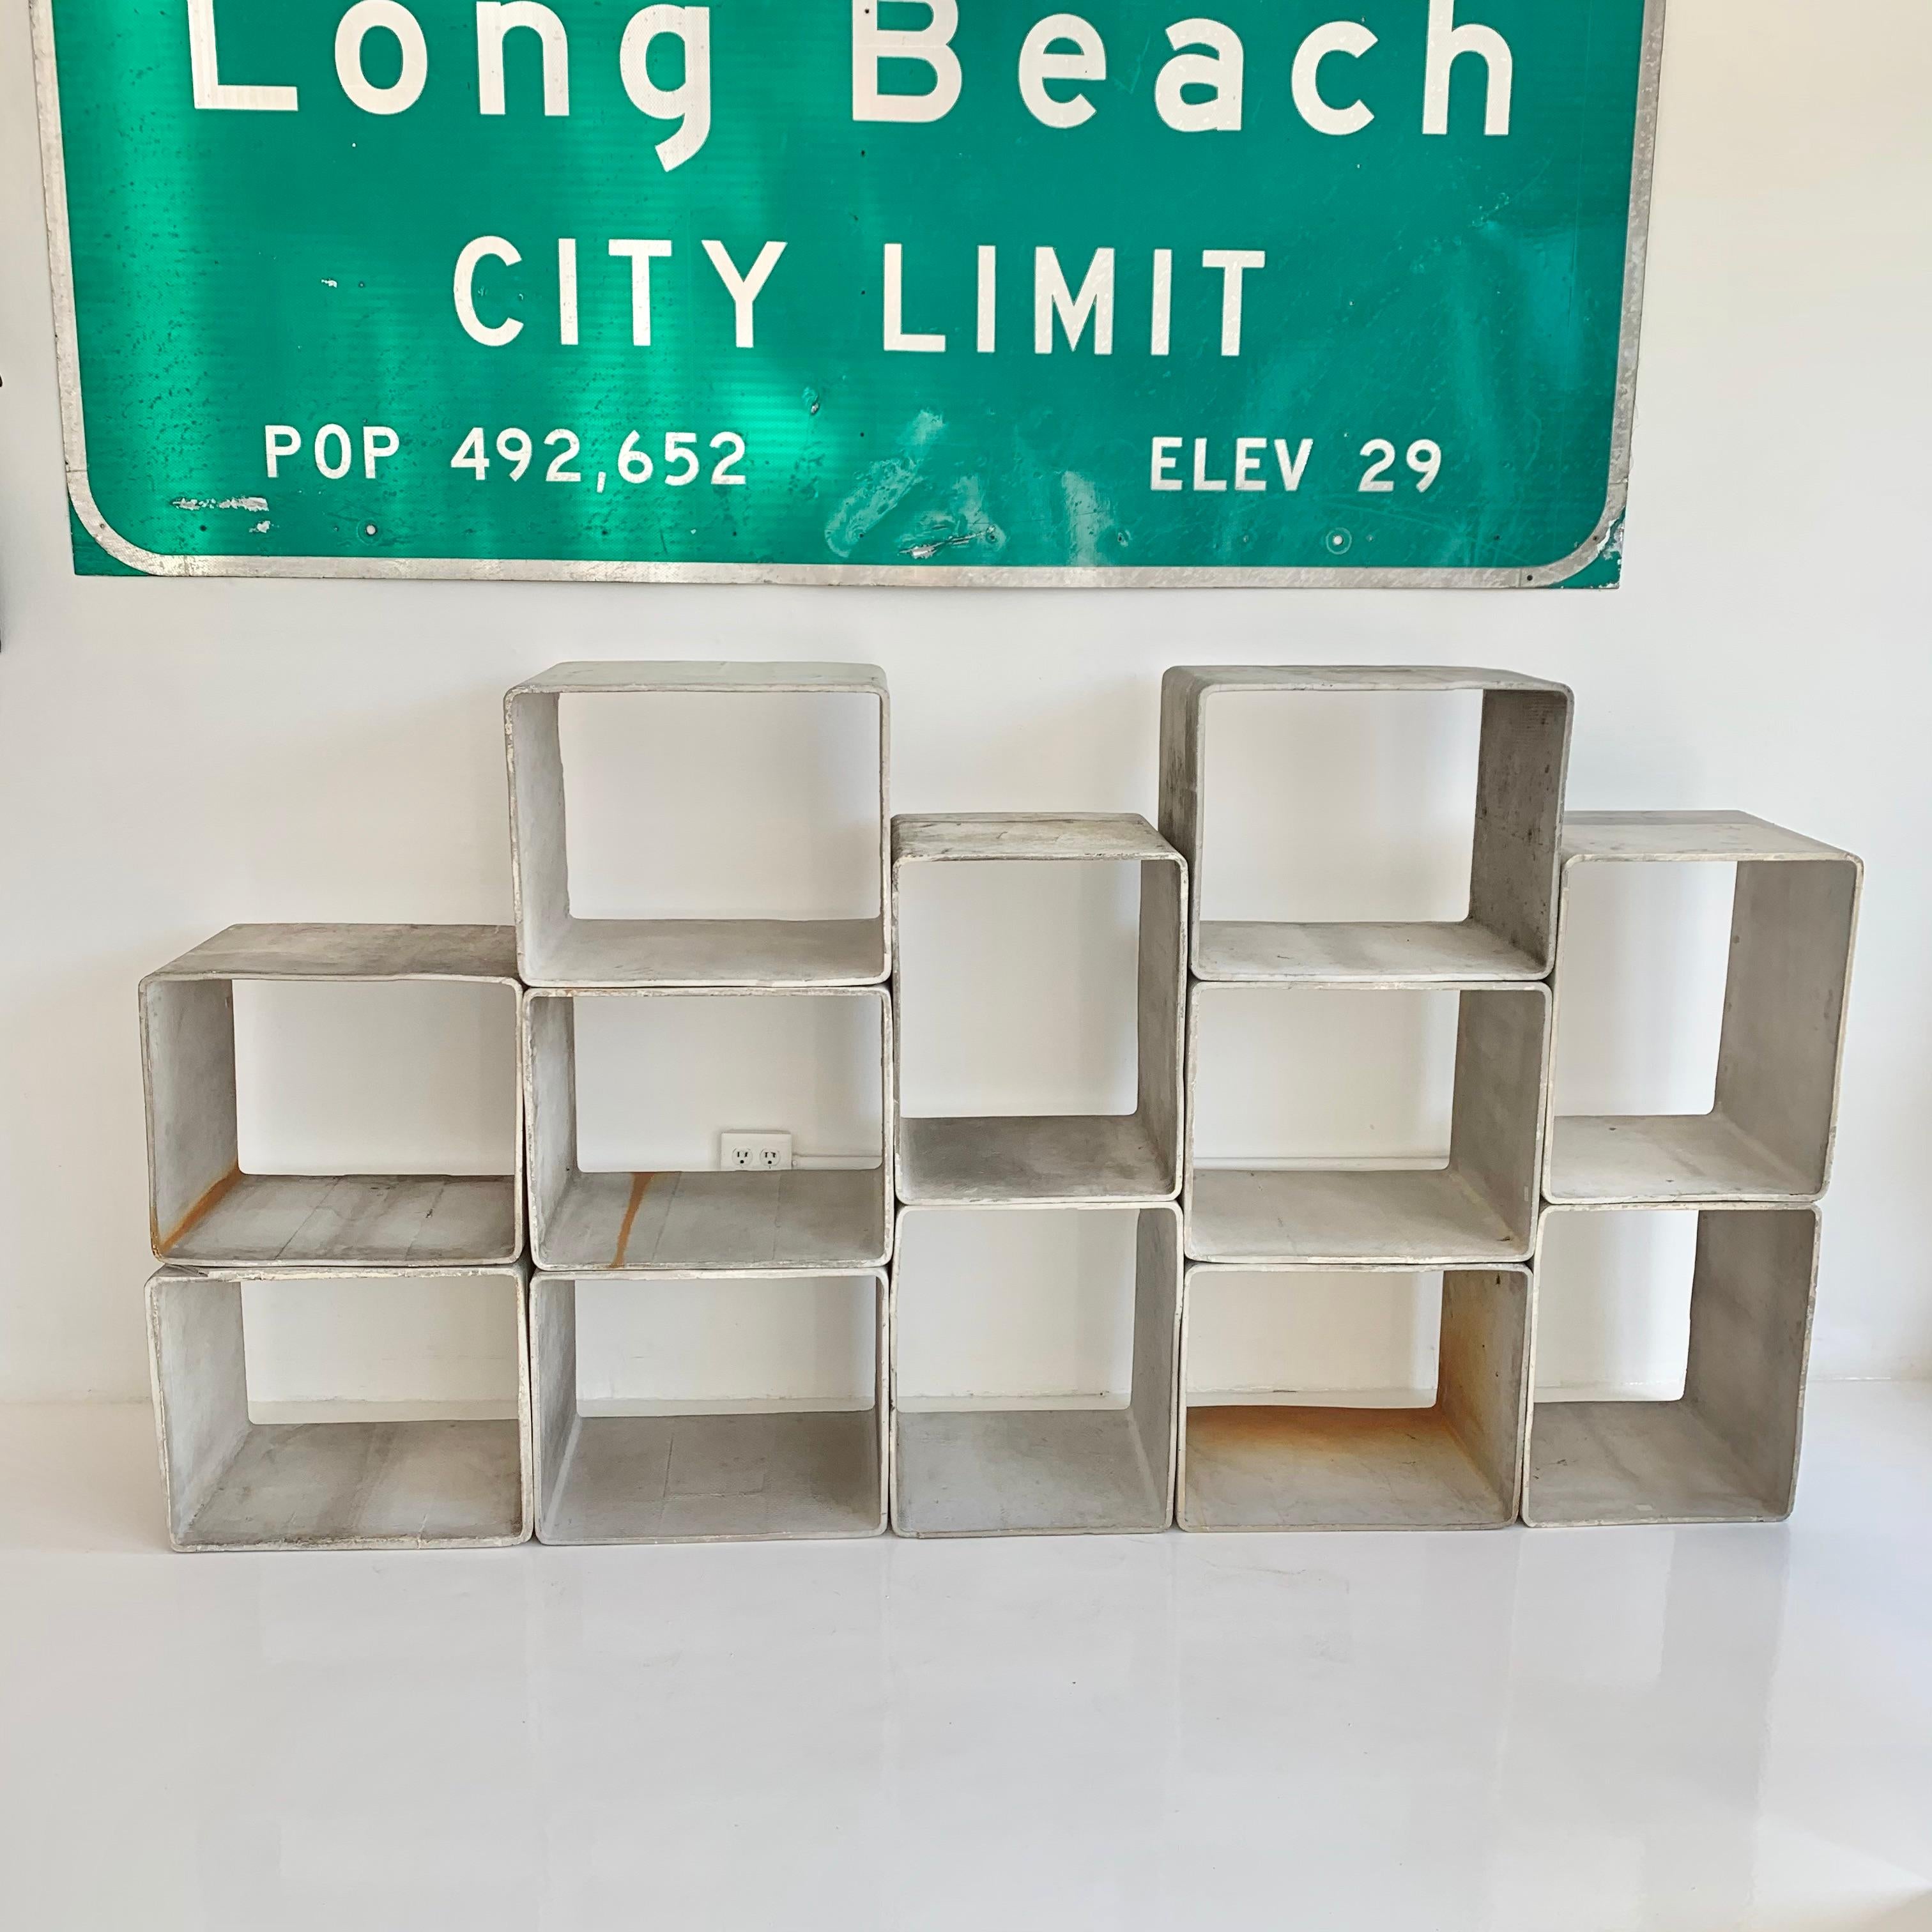 Massive set of concrete cubes by Swiss architect and designer Willy Guhl. Handmade in the early 1960s in Switzerland. Produced by Eternit. Set of 12 cubes in great original condition. Can be arranged in a multitude of ways. Perfect bookcase, room